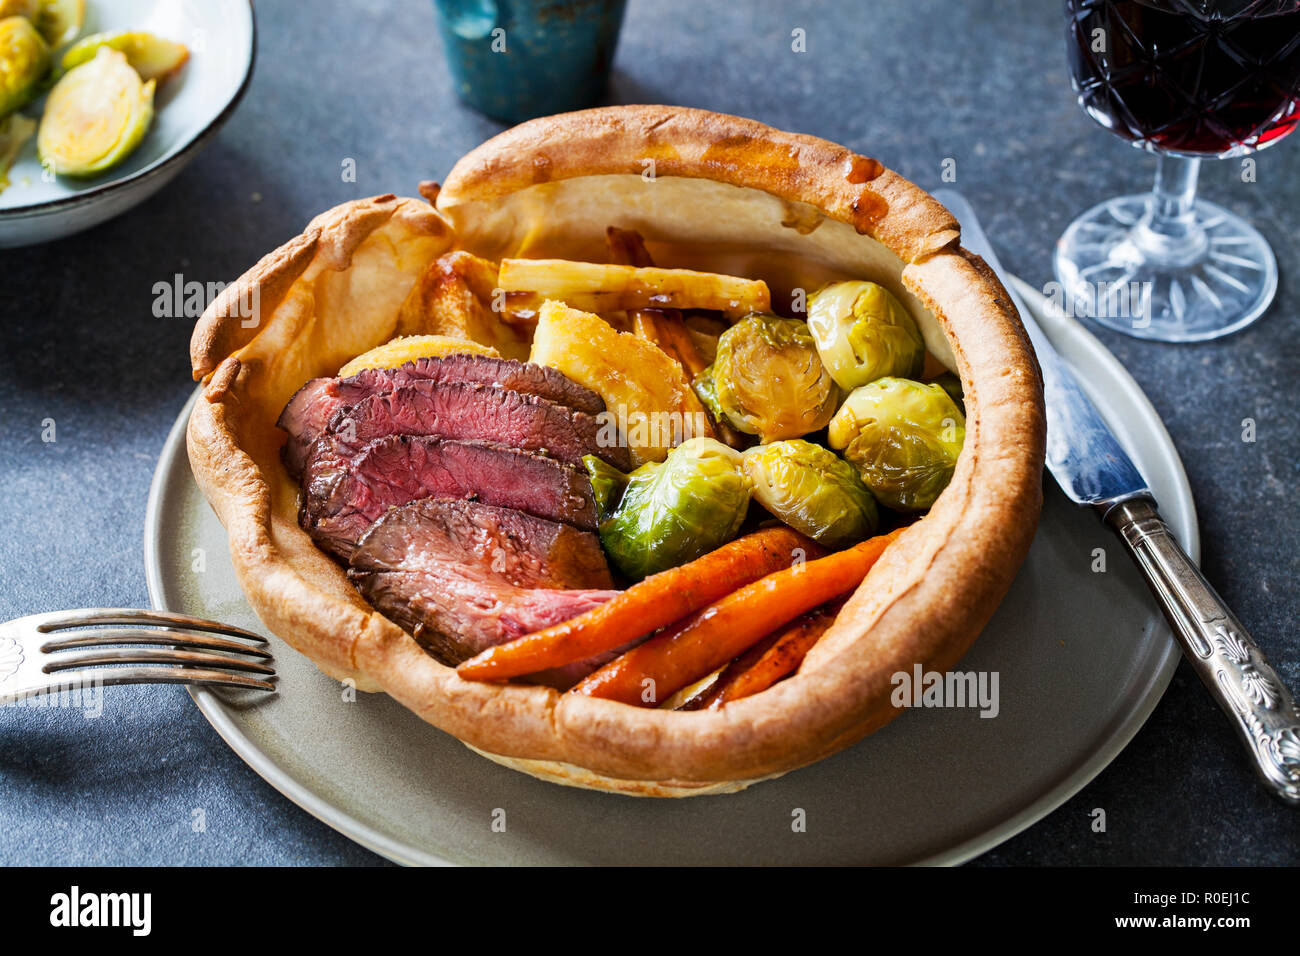 Roast dinner with beef, carrots, brussel sprouts in giant yorkshire pudding Stock Photo